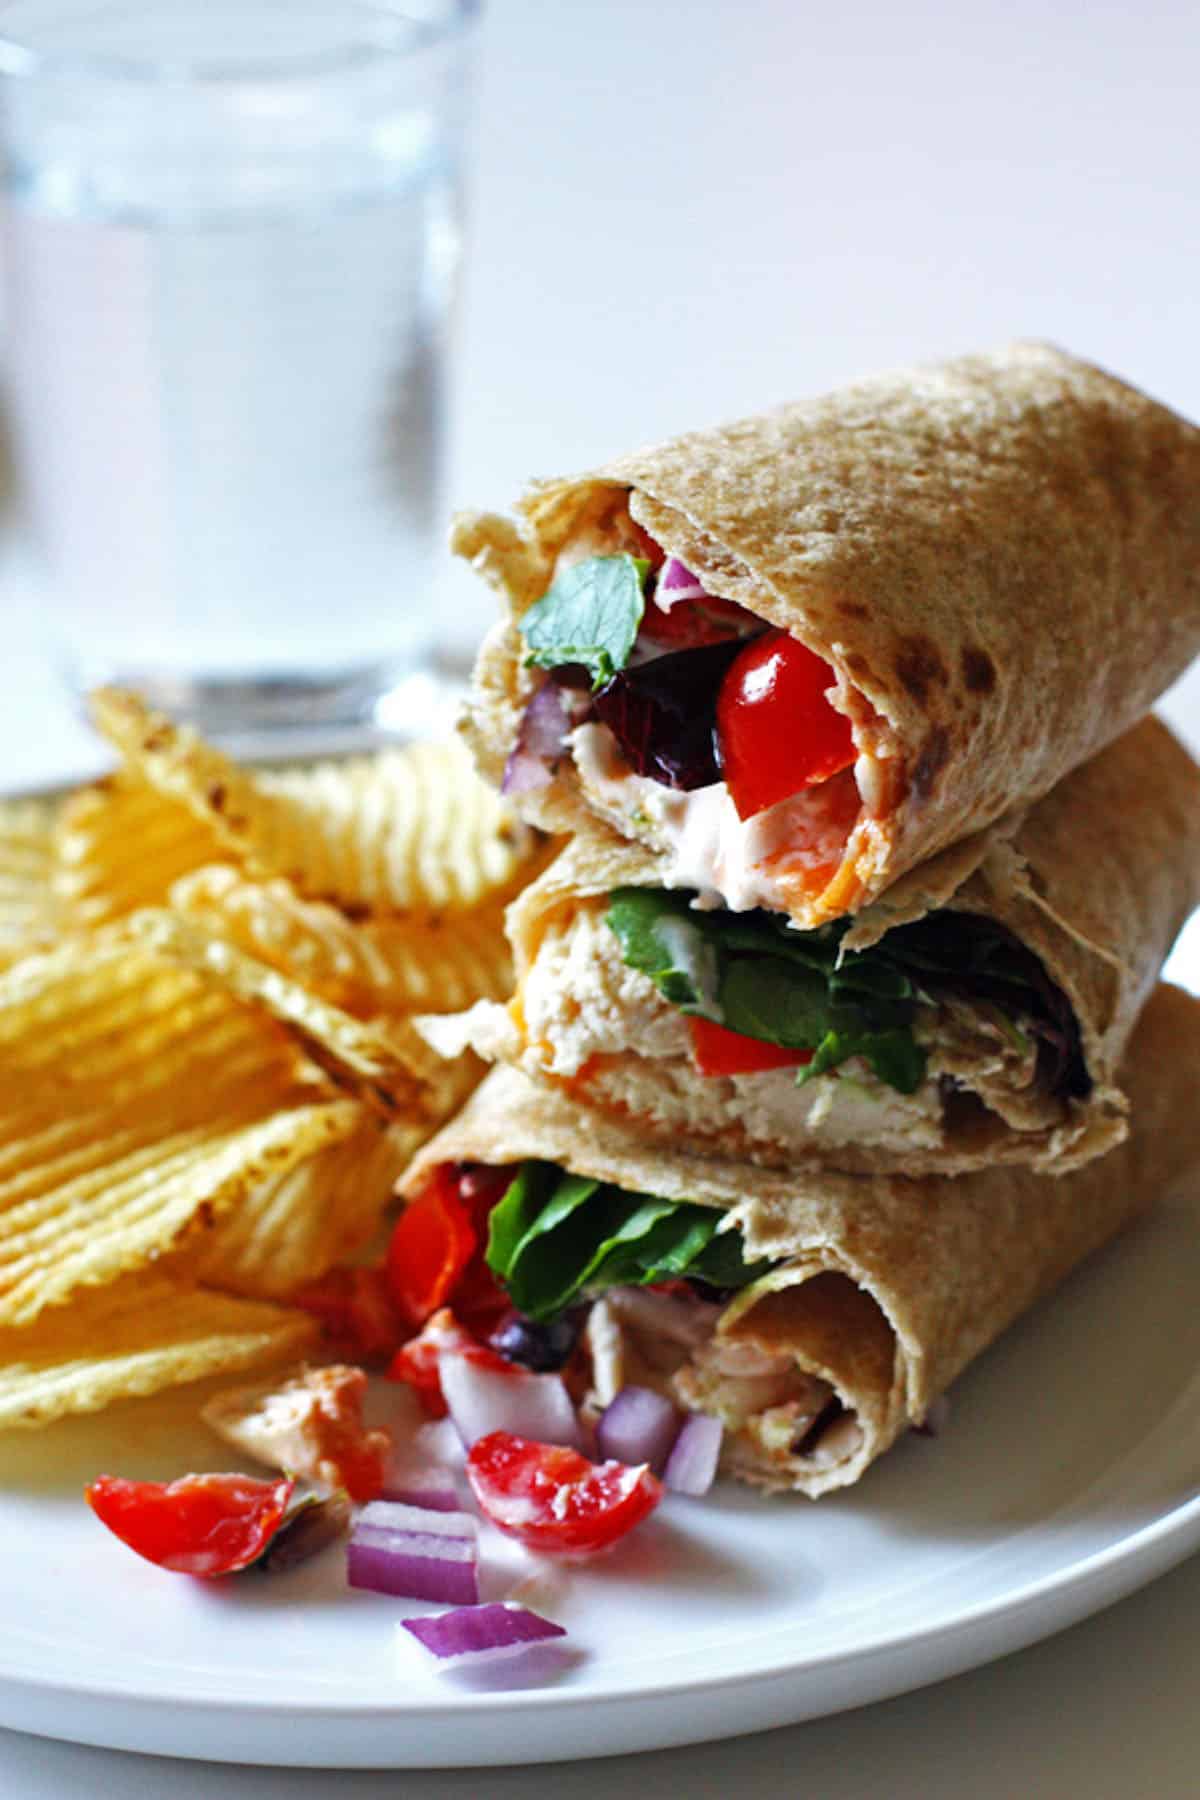 A stack of three chicken wraps on w plate with tomatoes, red onion, and chips.